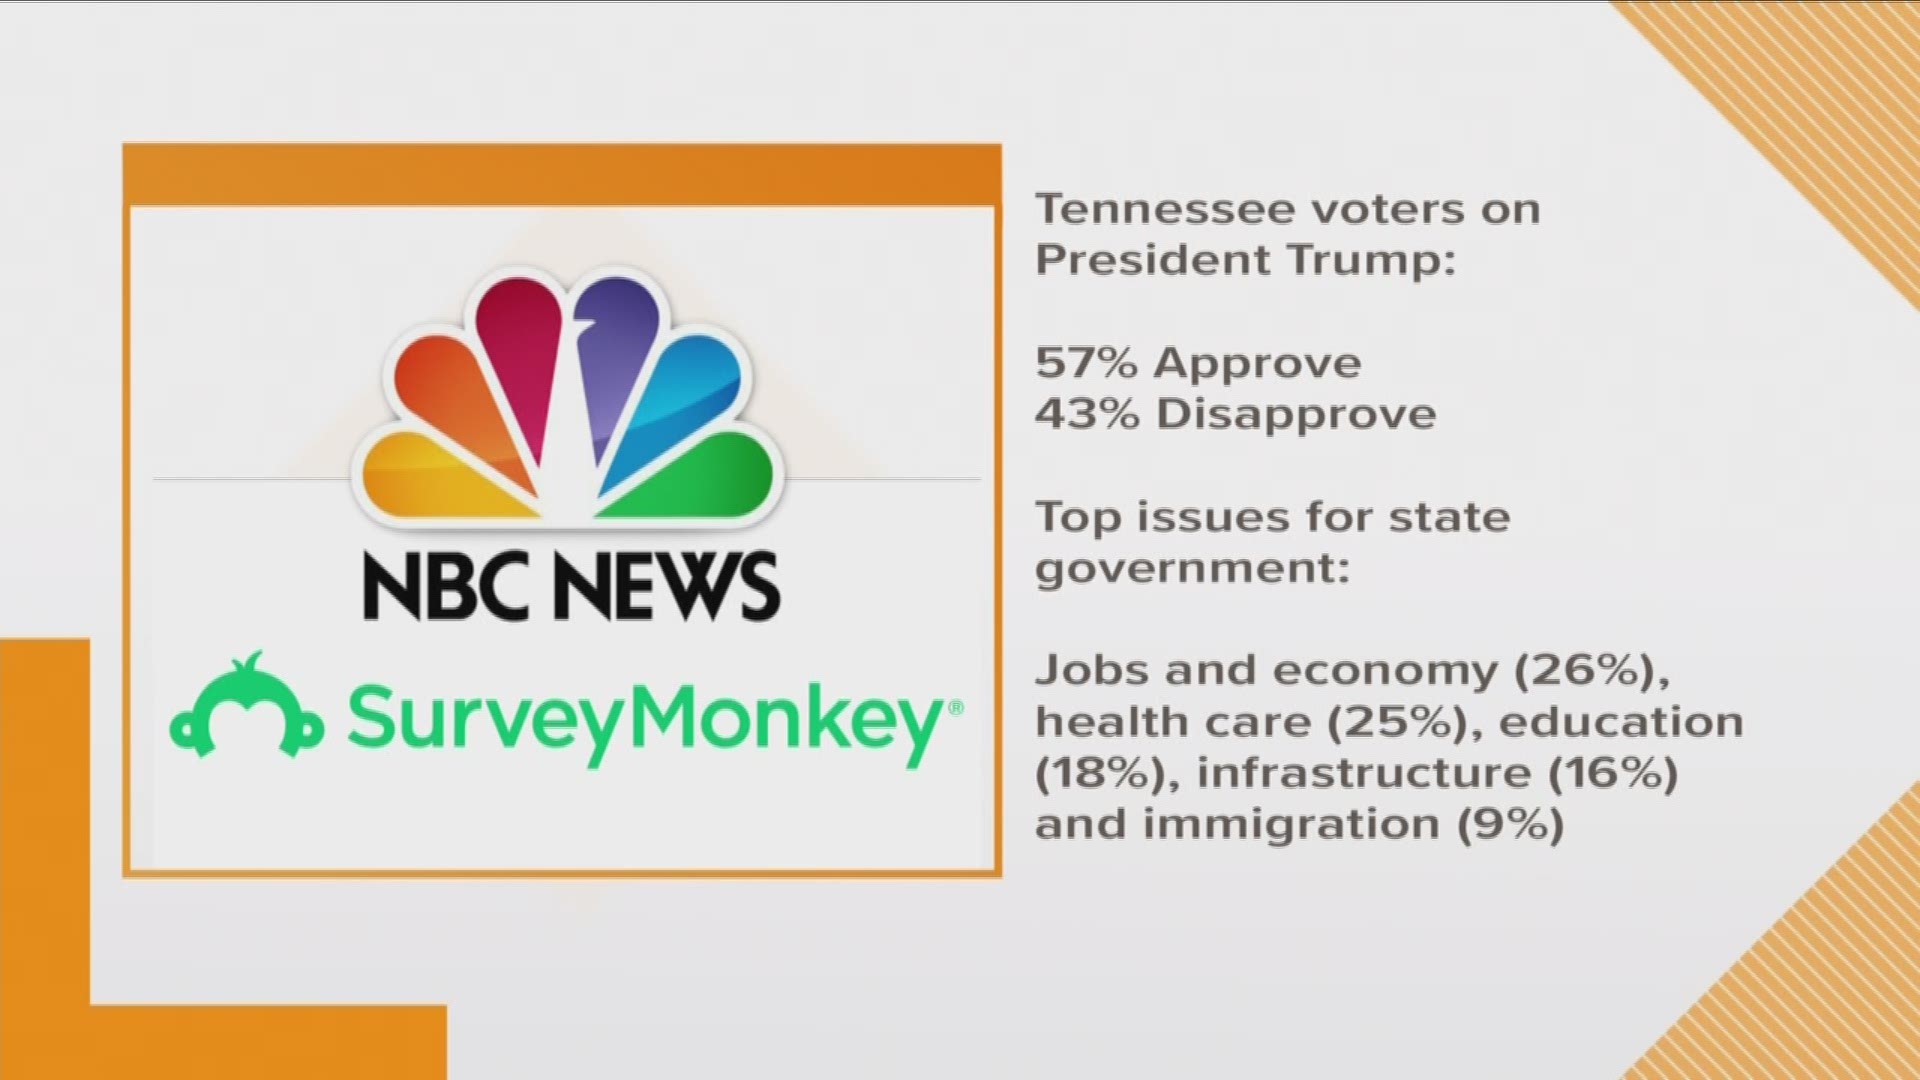 An NBC News|SurveyMonkey poll shows most Tennesseans approve of President Trump. Among registered voters, 57% said they approved how the president is handling his job and 43% disapproved.